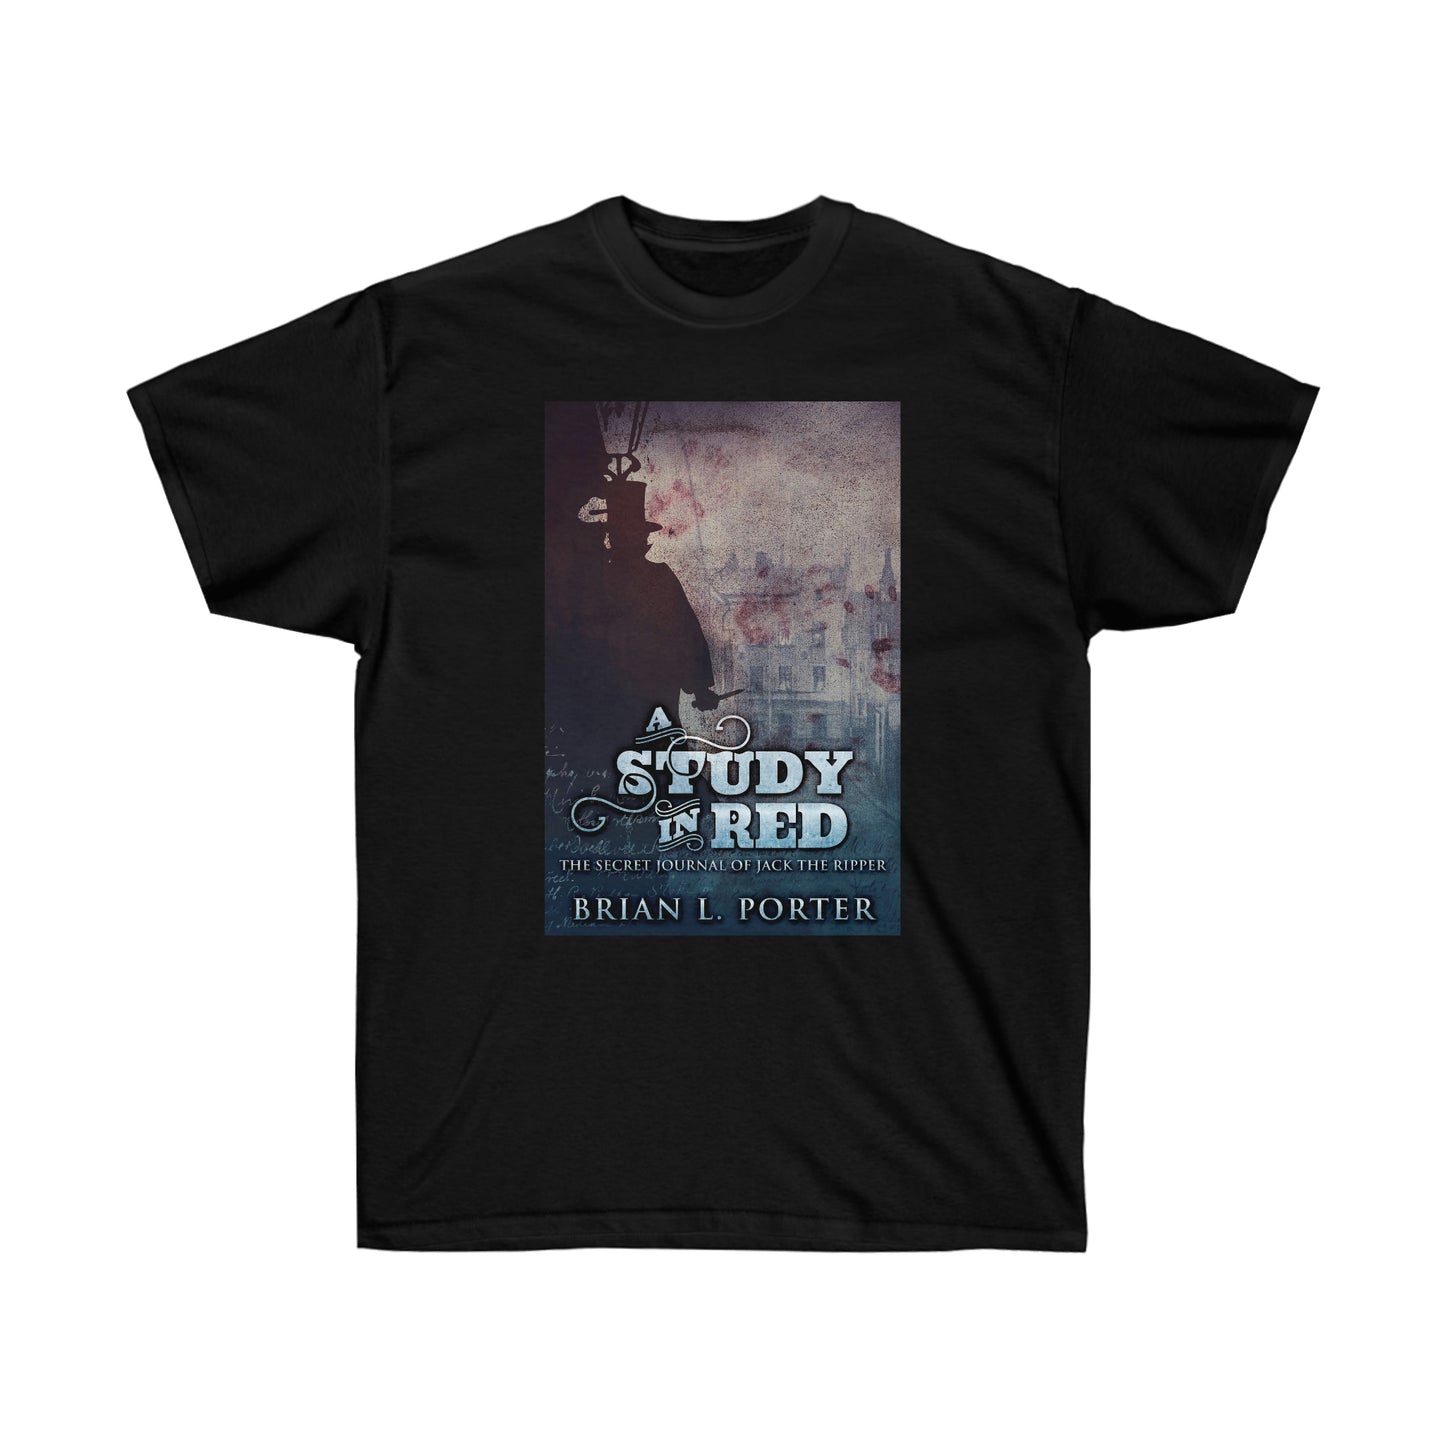 A Study In Red - Unisex T-Shirt